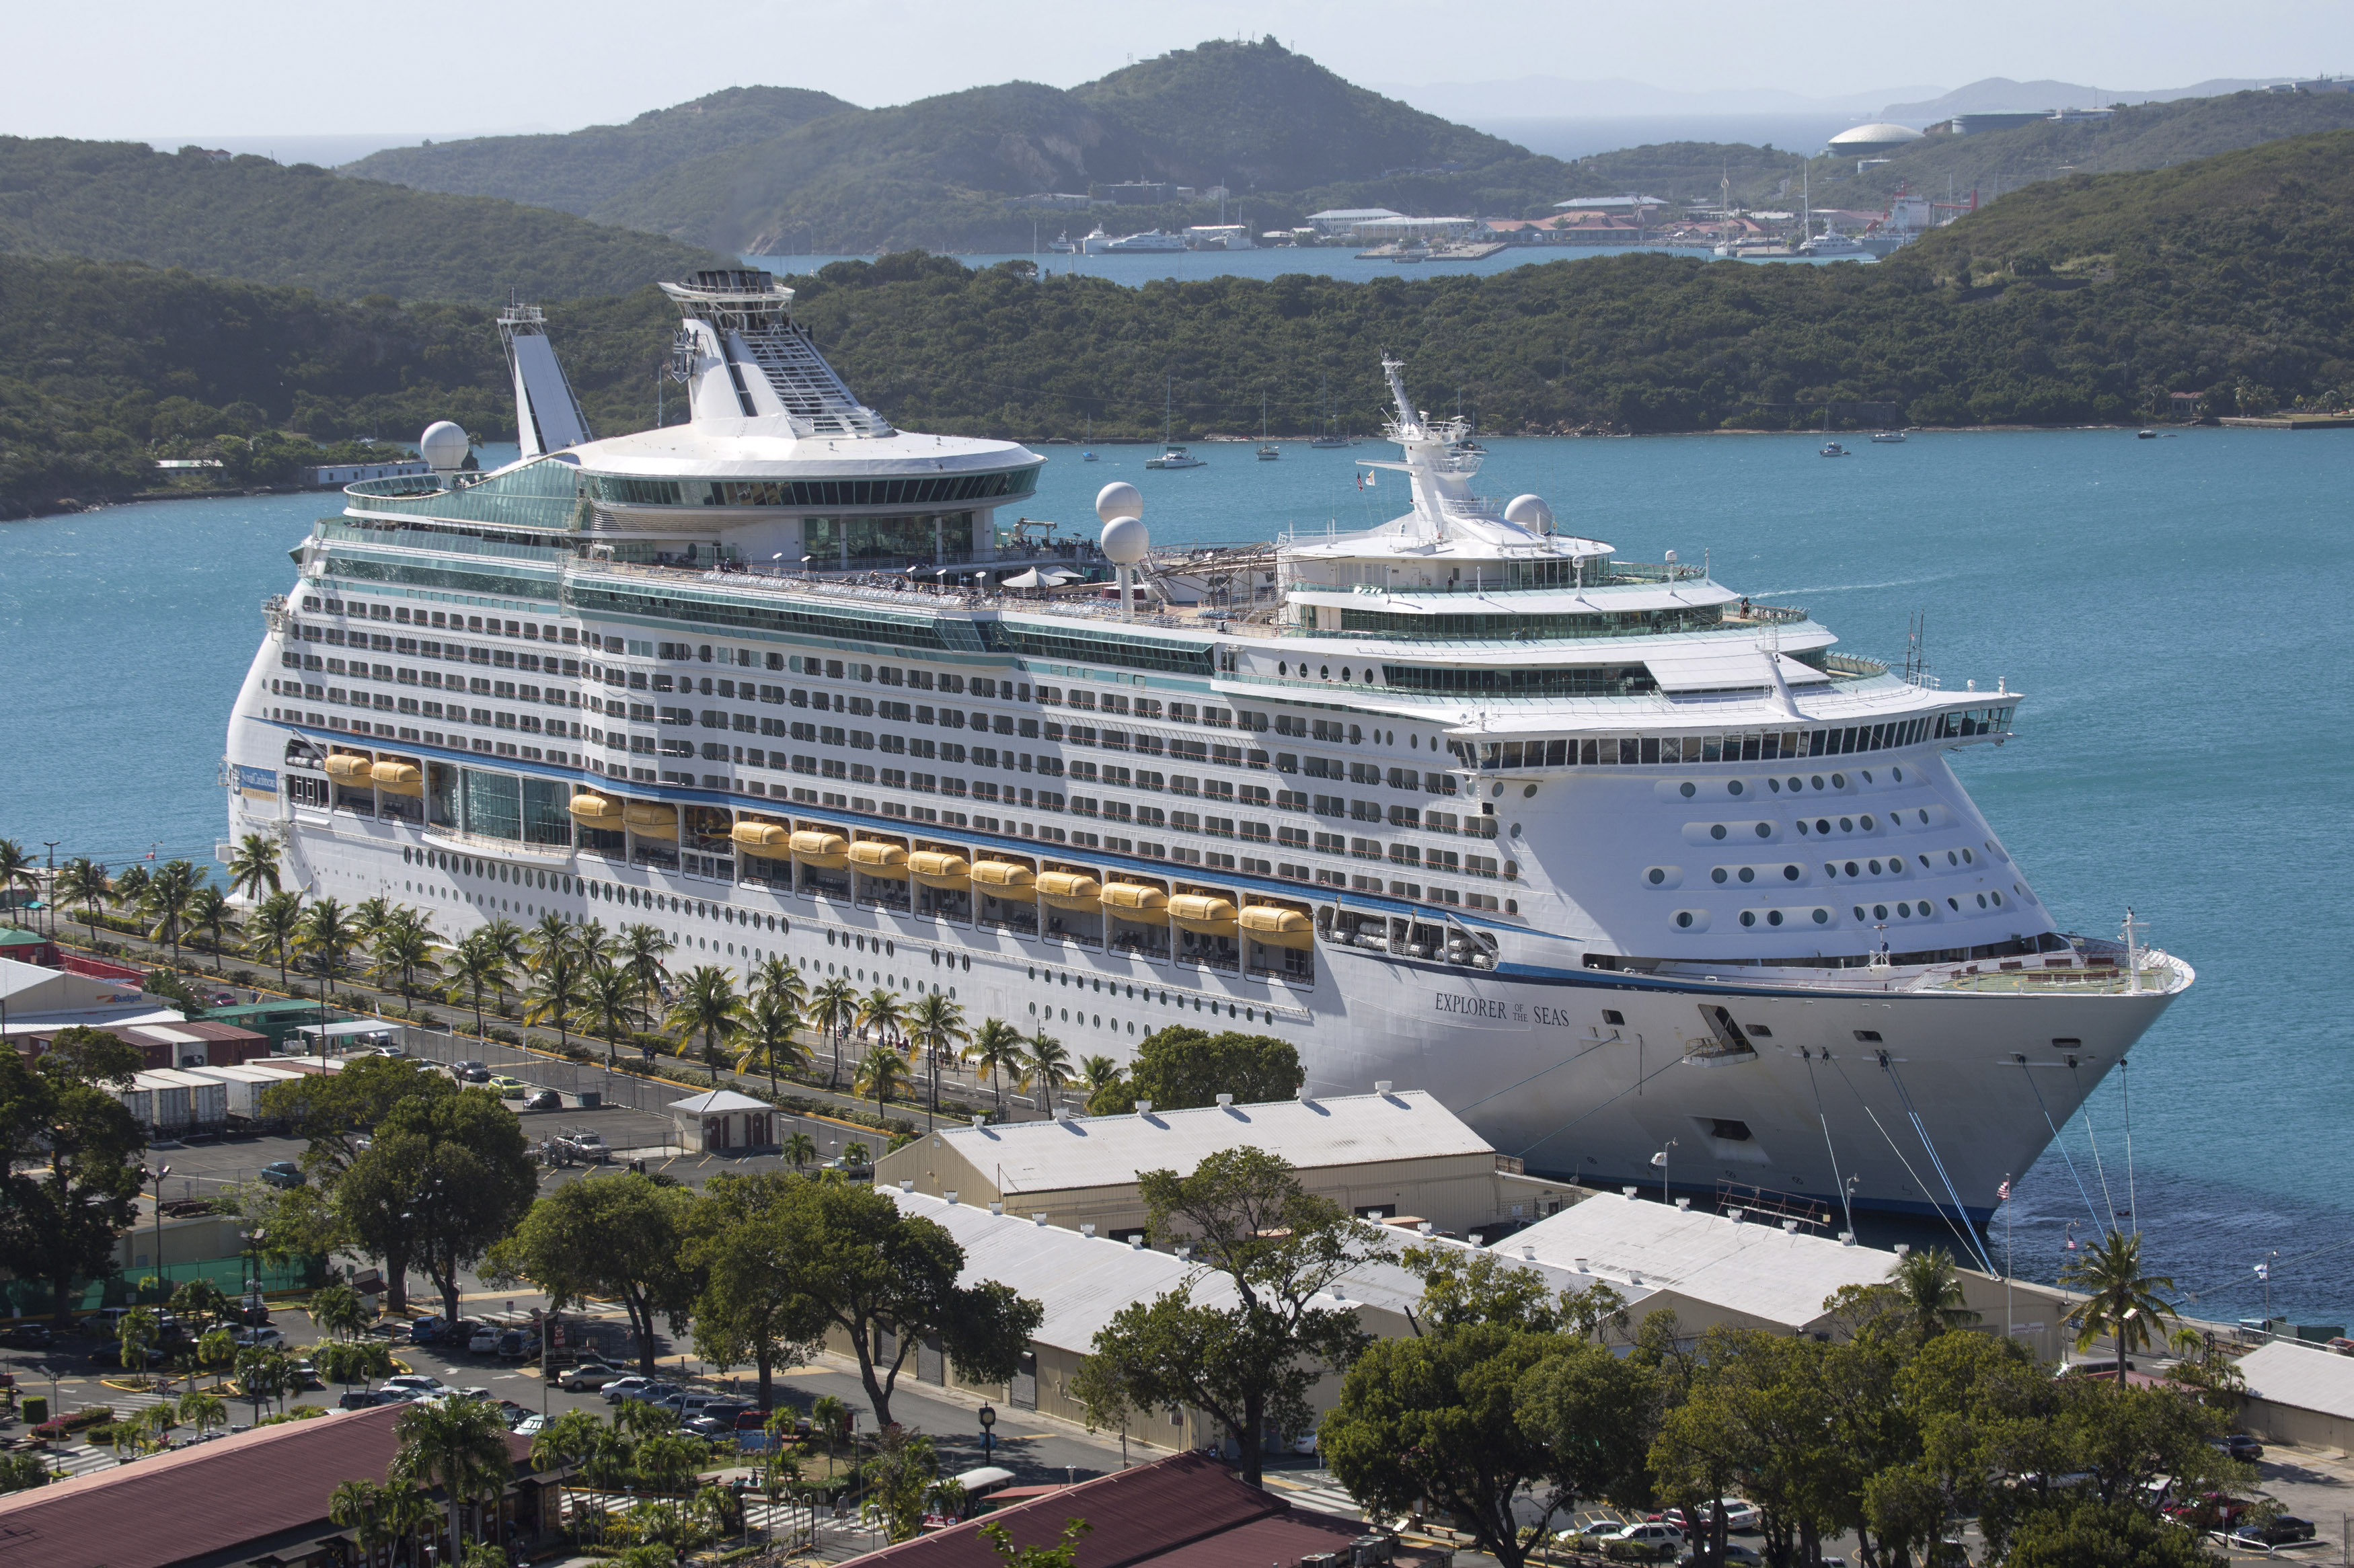 Kingston, Jamaica Caribbean Cruise Ended After Outbreak Of Illness